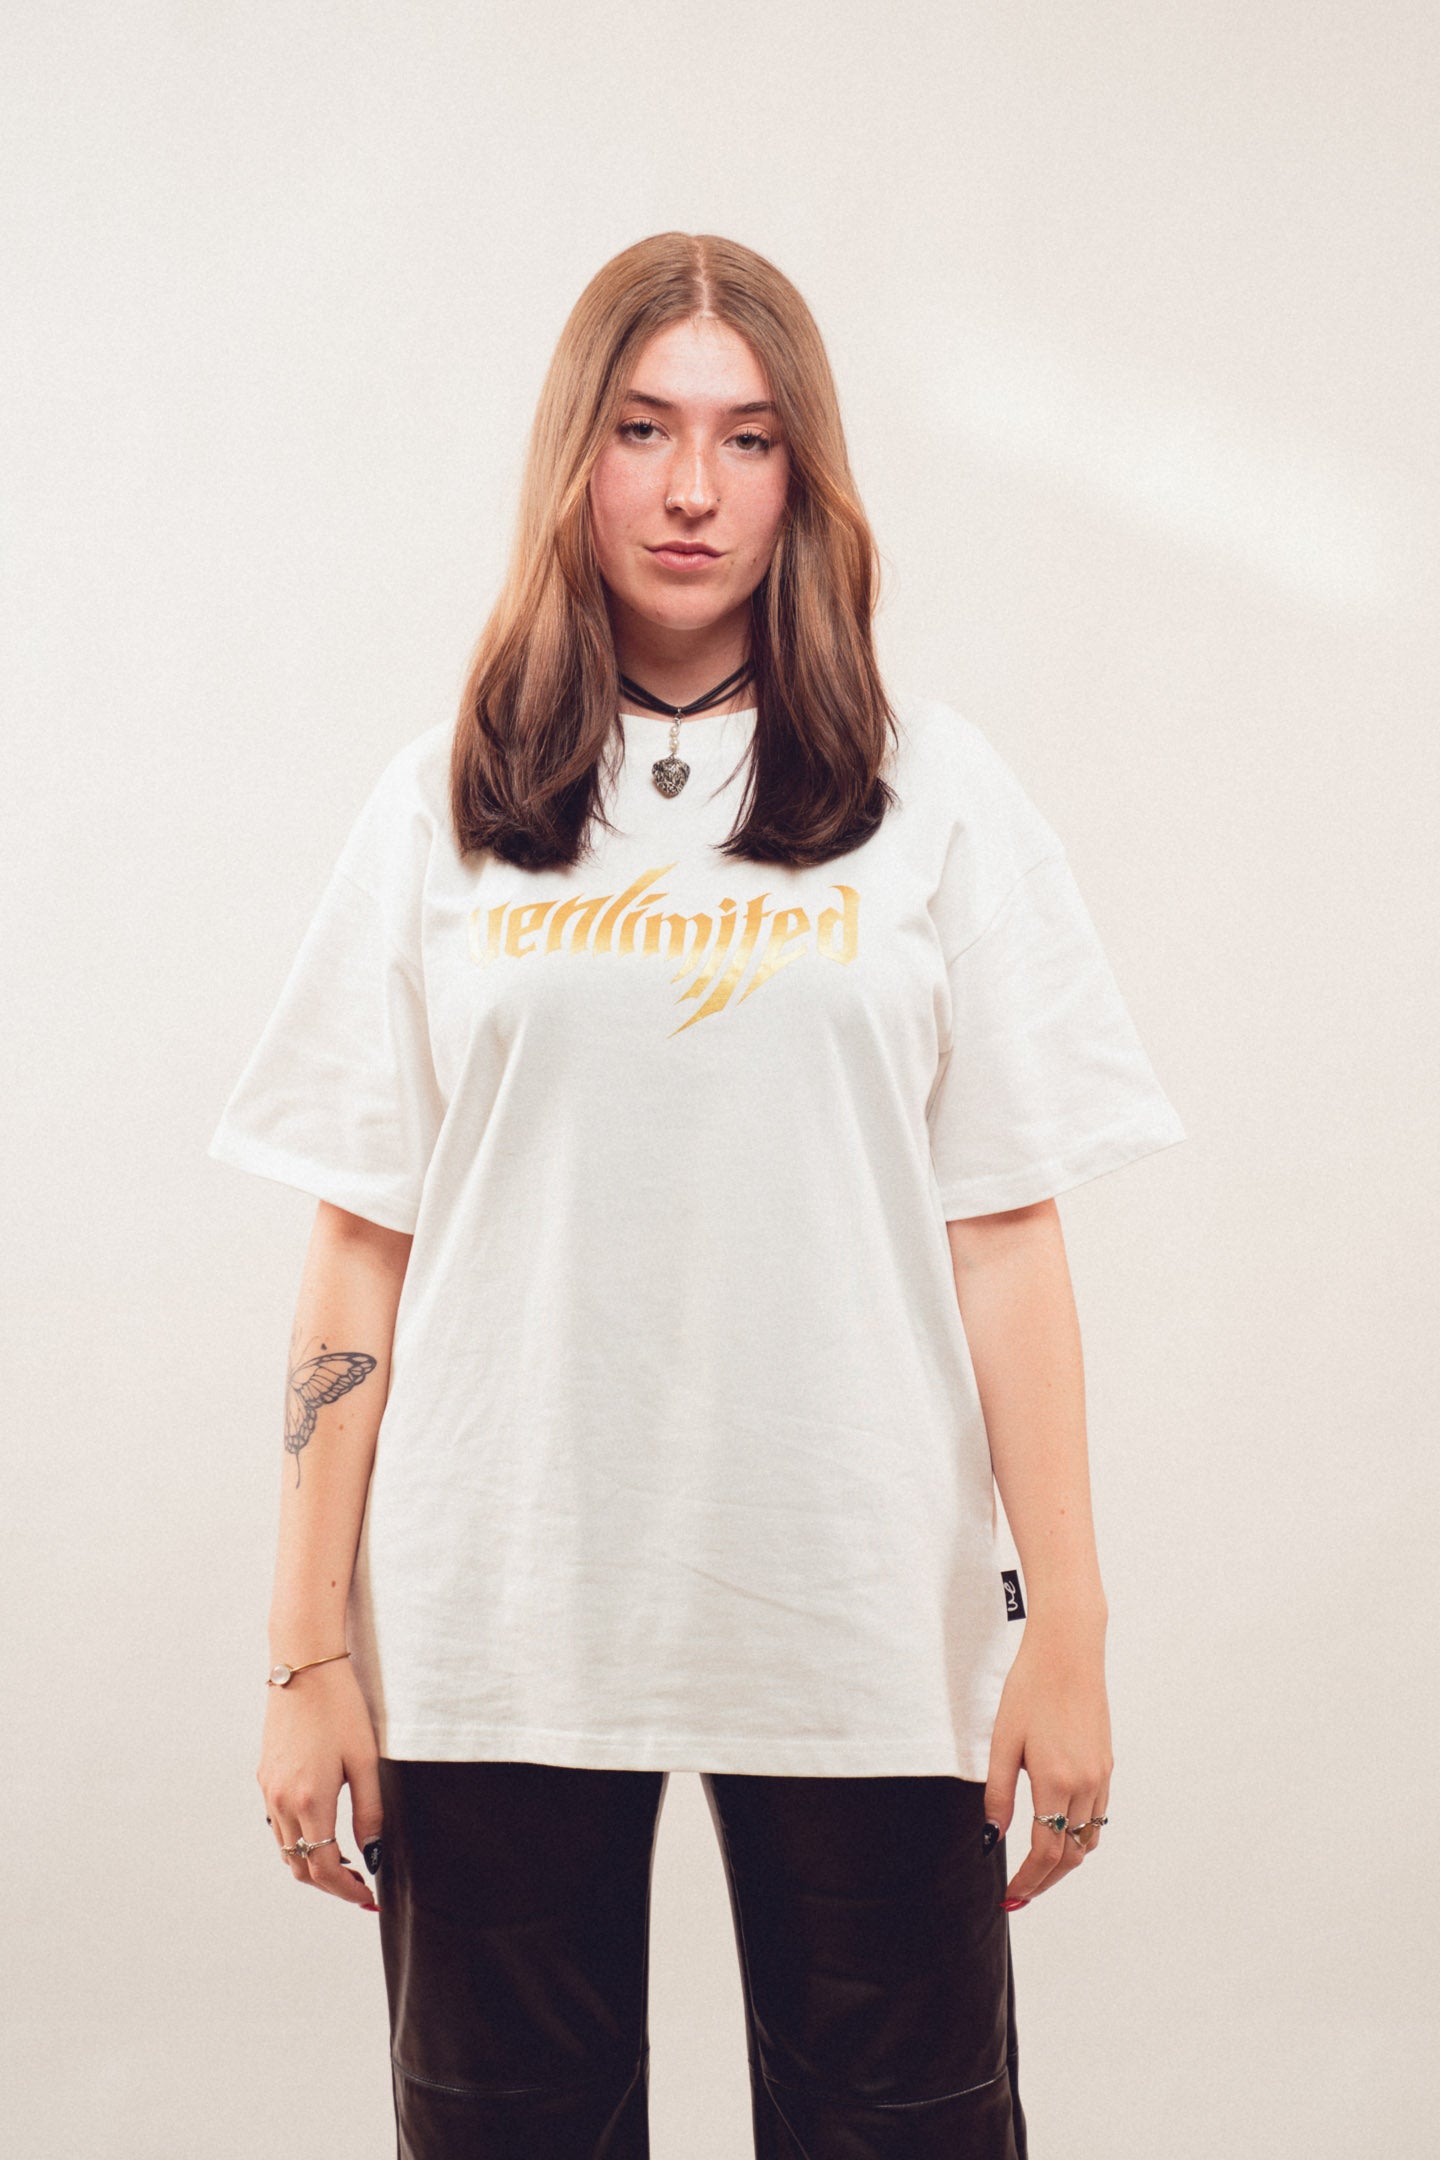 Shirt "in concert" white